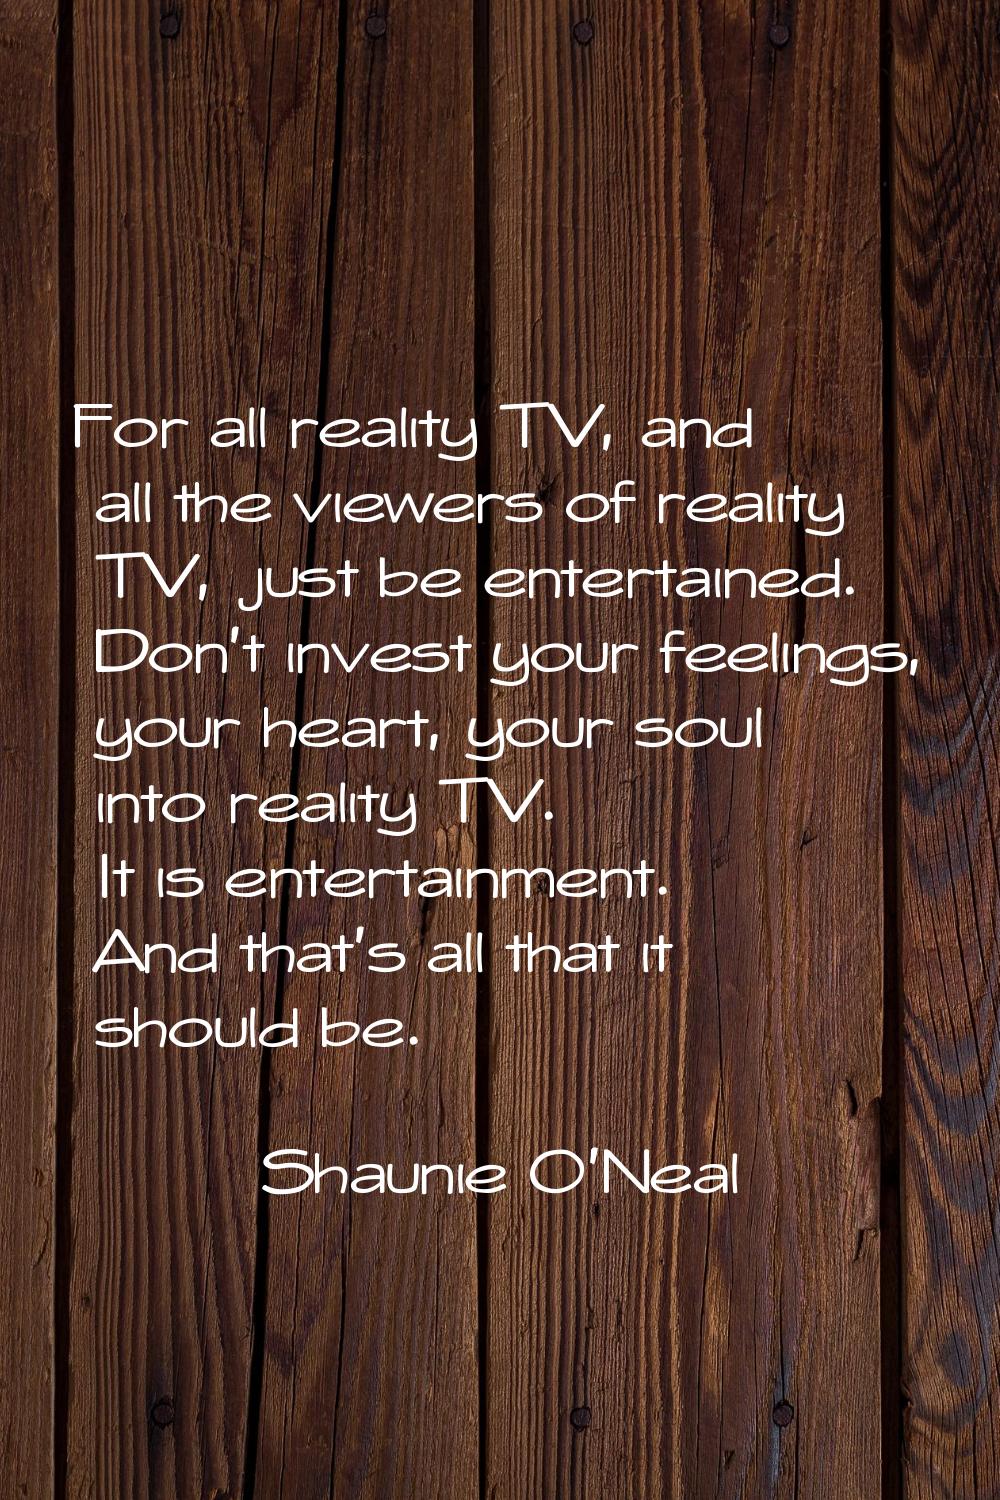 For all reality TV, and all the viewers of reality TV, just be entertained. Don't invest your feeli